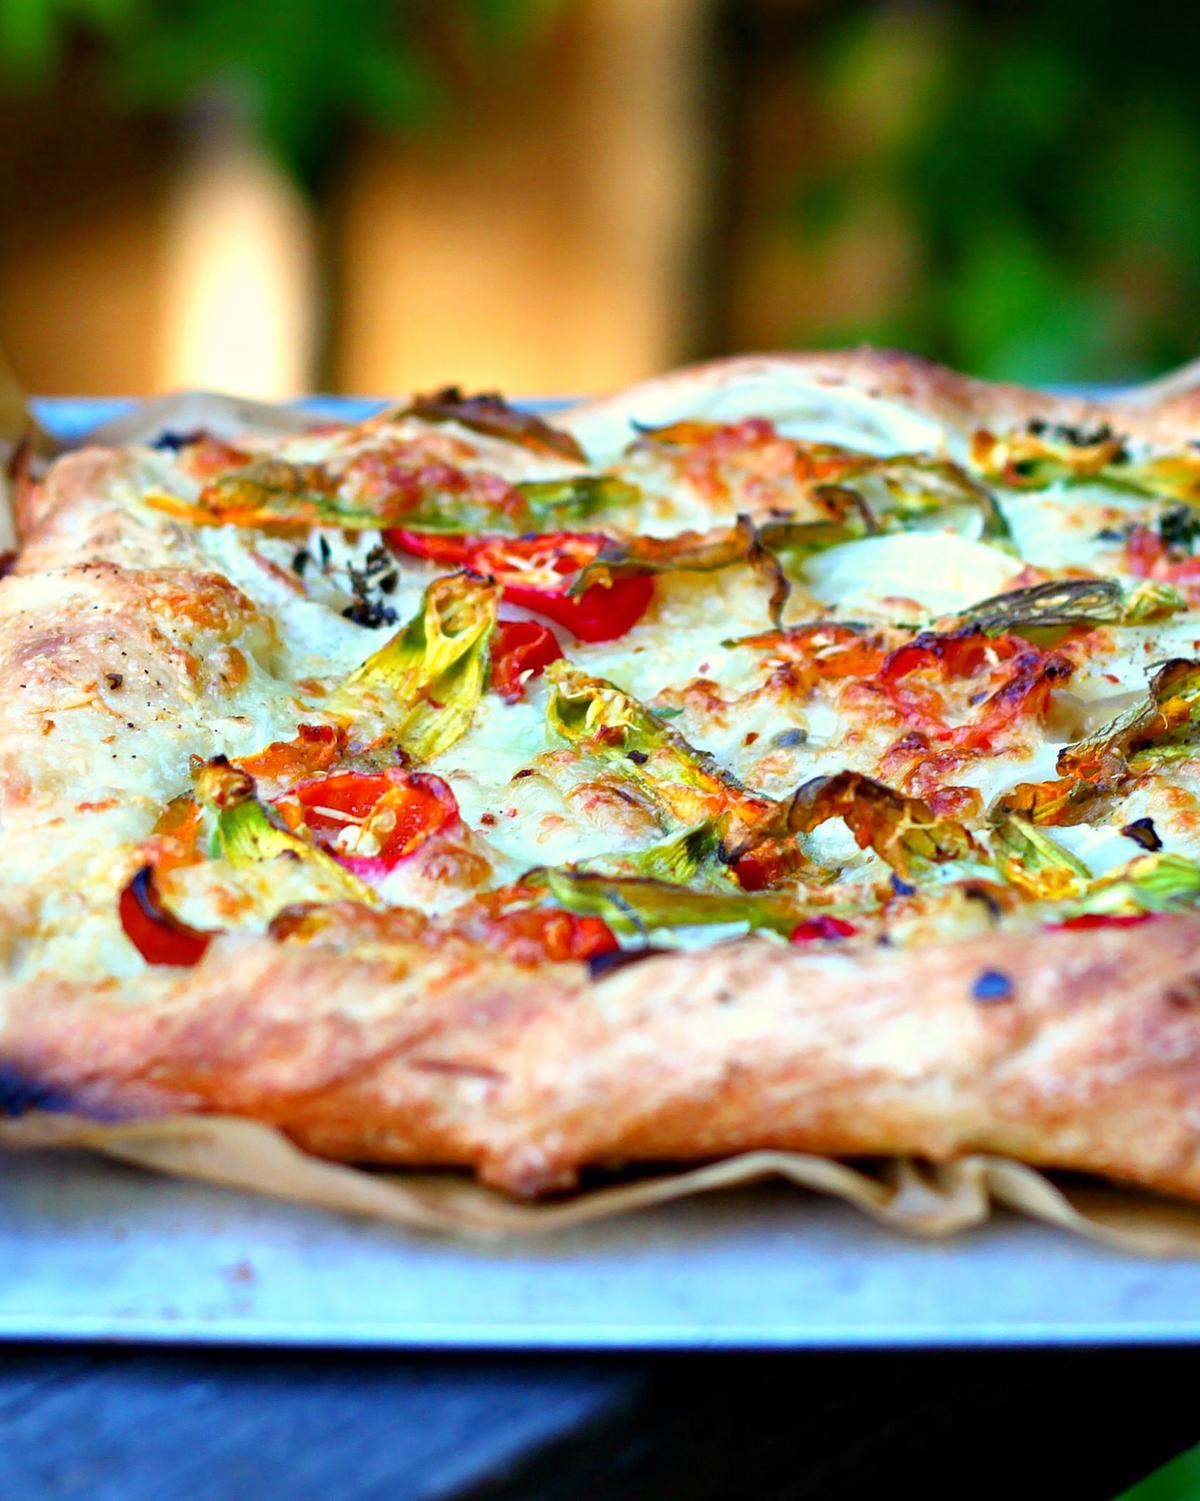 The zucchini flowers will shrivel and char while roasting, creating a colorful, textural topping for this pizza. (Lynda Balslev for Tastefood)